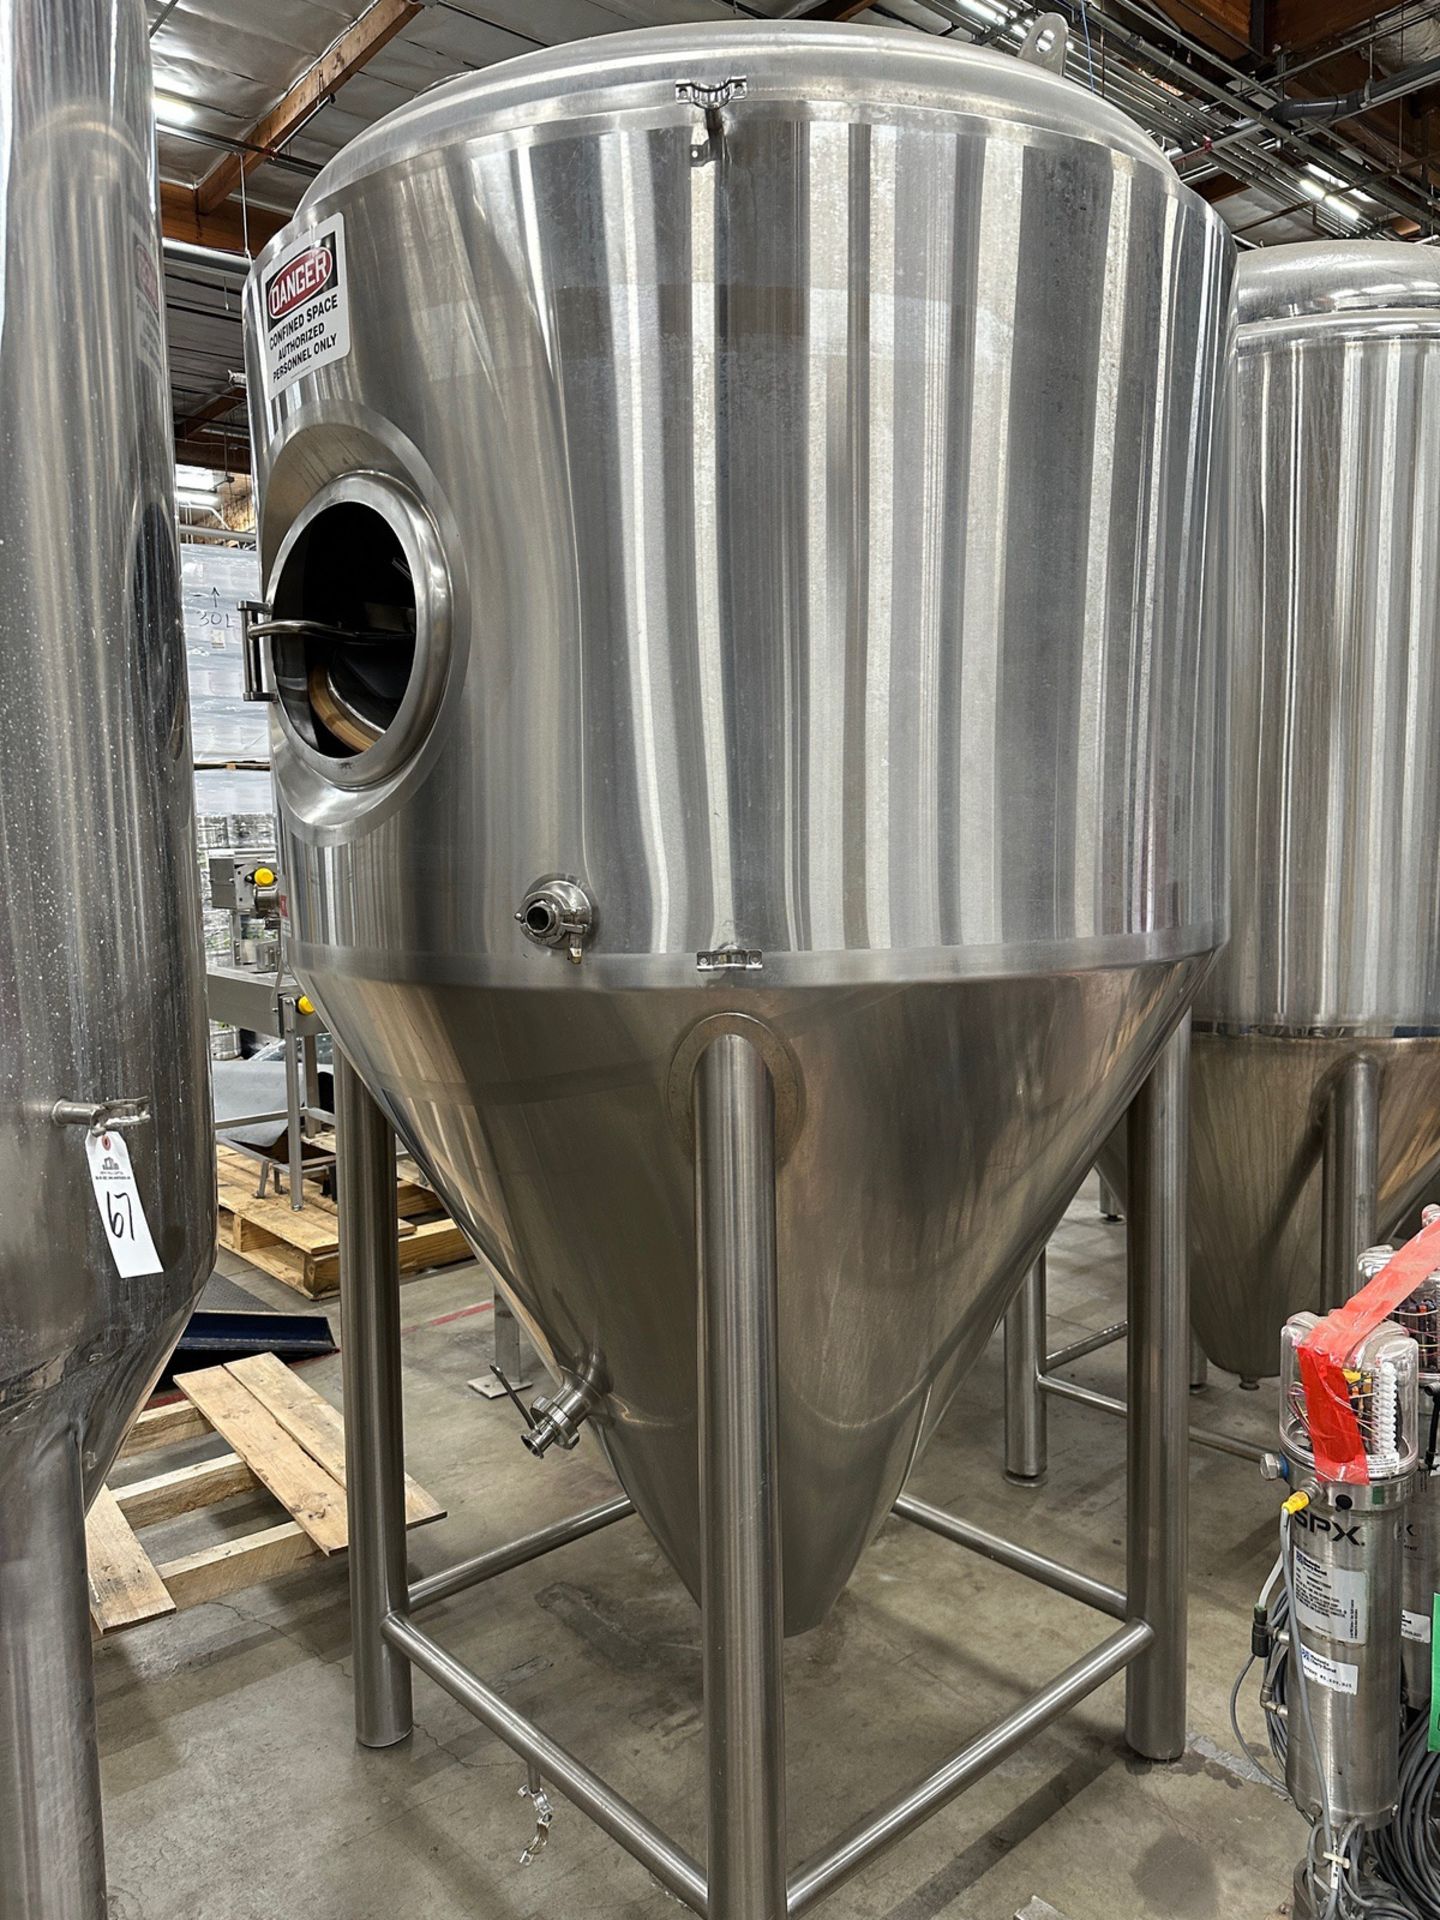 20 BBL Stainless Steel Fermentation Tank, Cone Bottom, Glycol Jacketed, No Fittings | Rig Fee $750 - Image 3 of 3